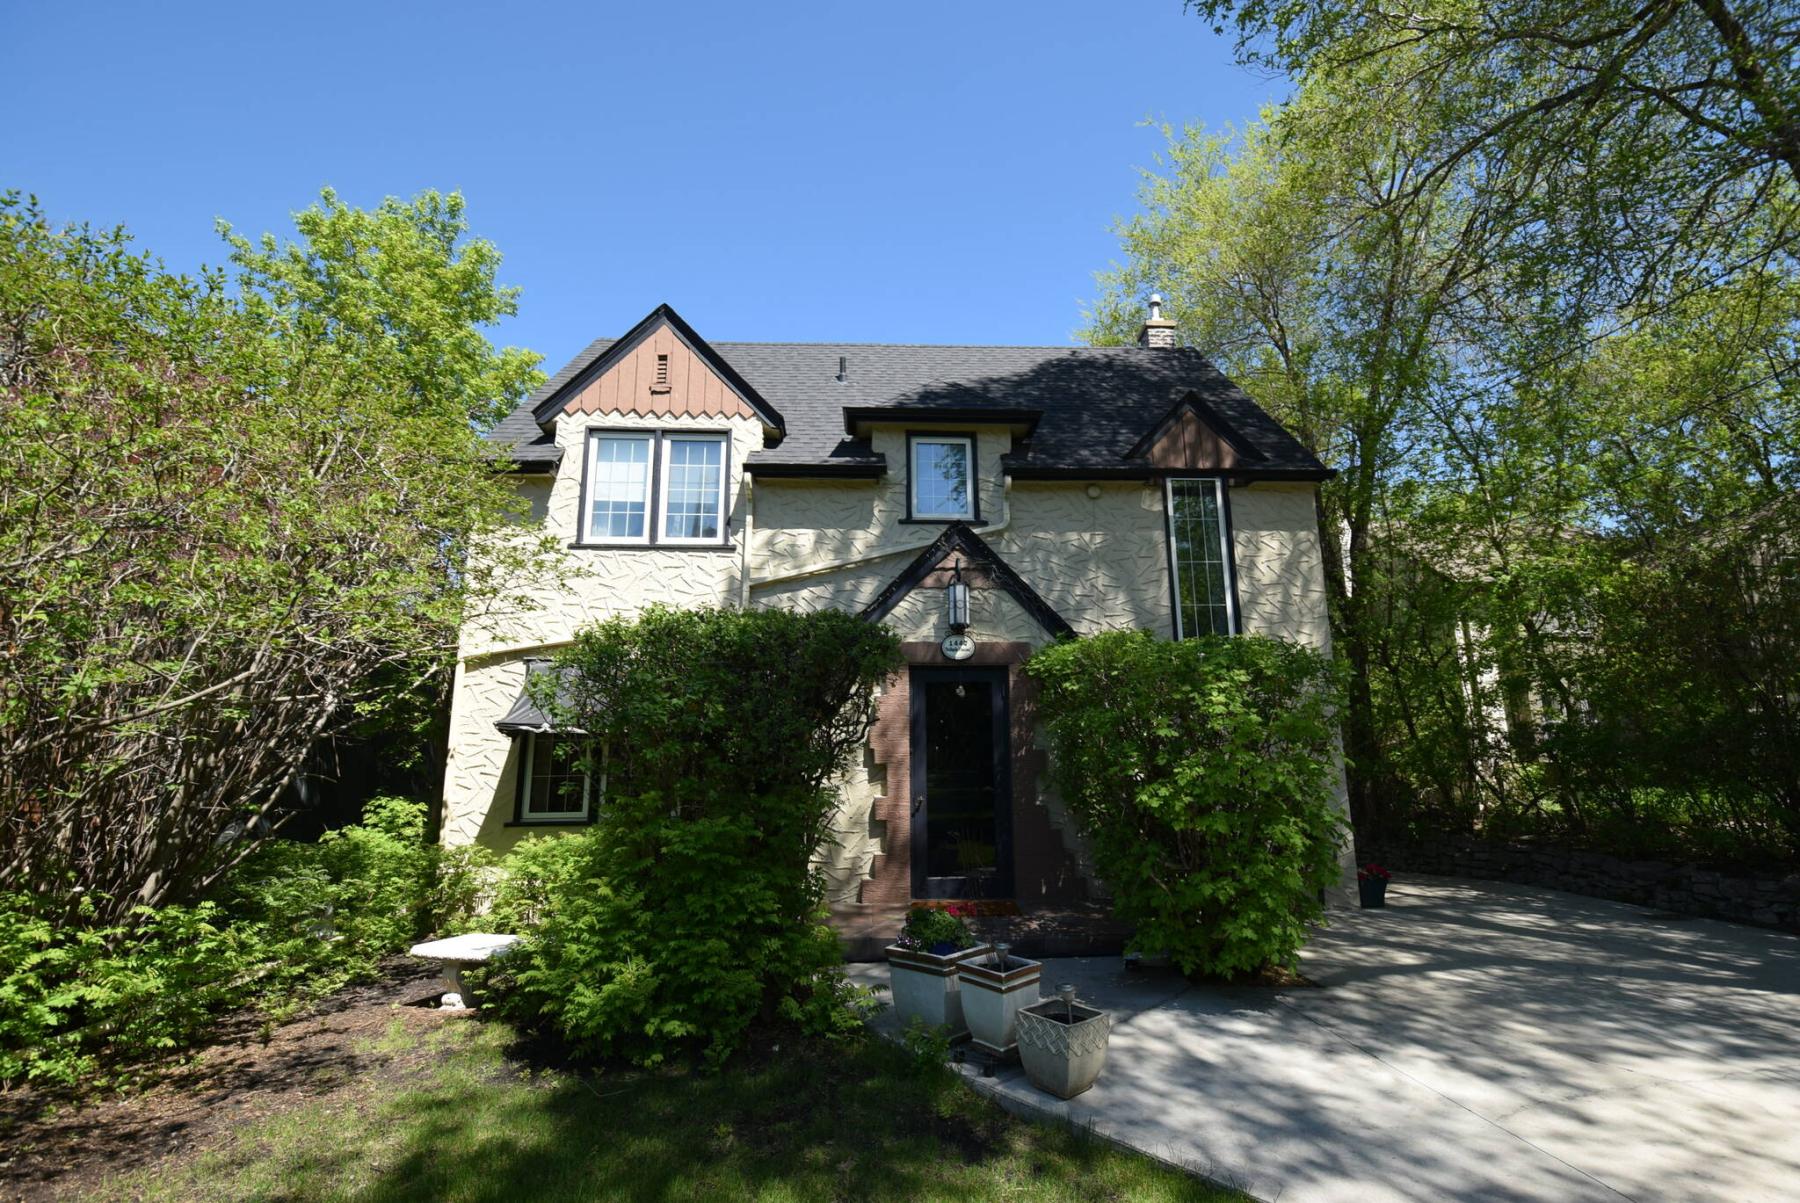  <p>Photos by Todd Lewys / Winnipeg Free Press</p>
                                <p>The lovingly-maintained home is loaded with character and situated on a huge, park-like riverfront lot.</p> 